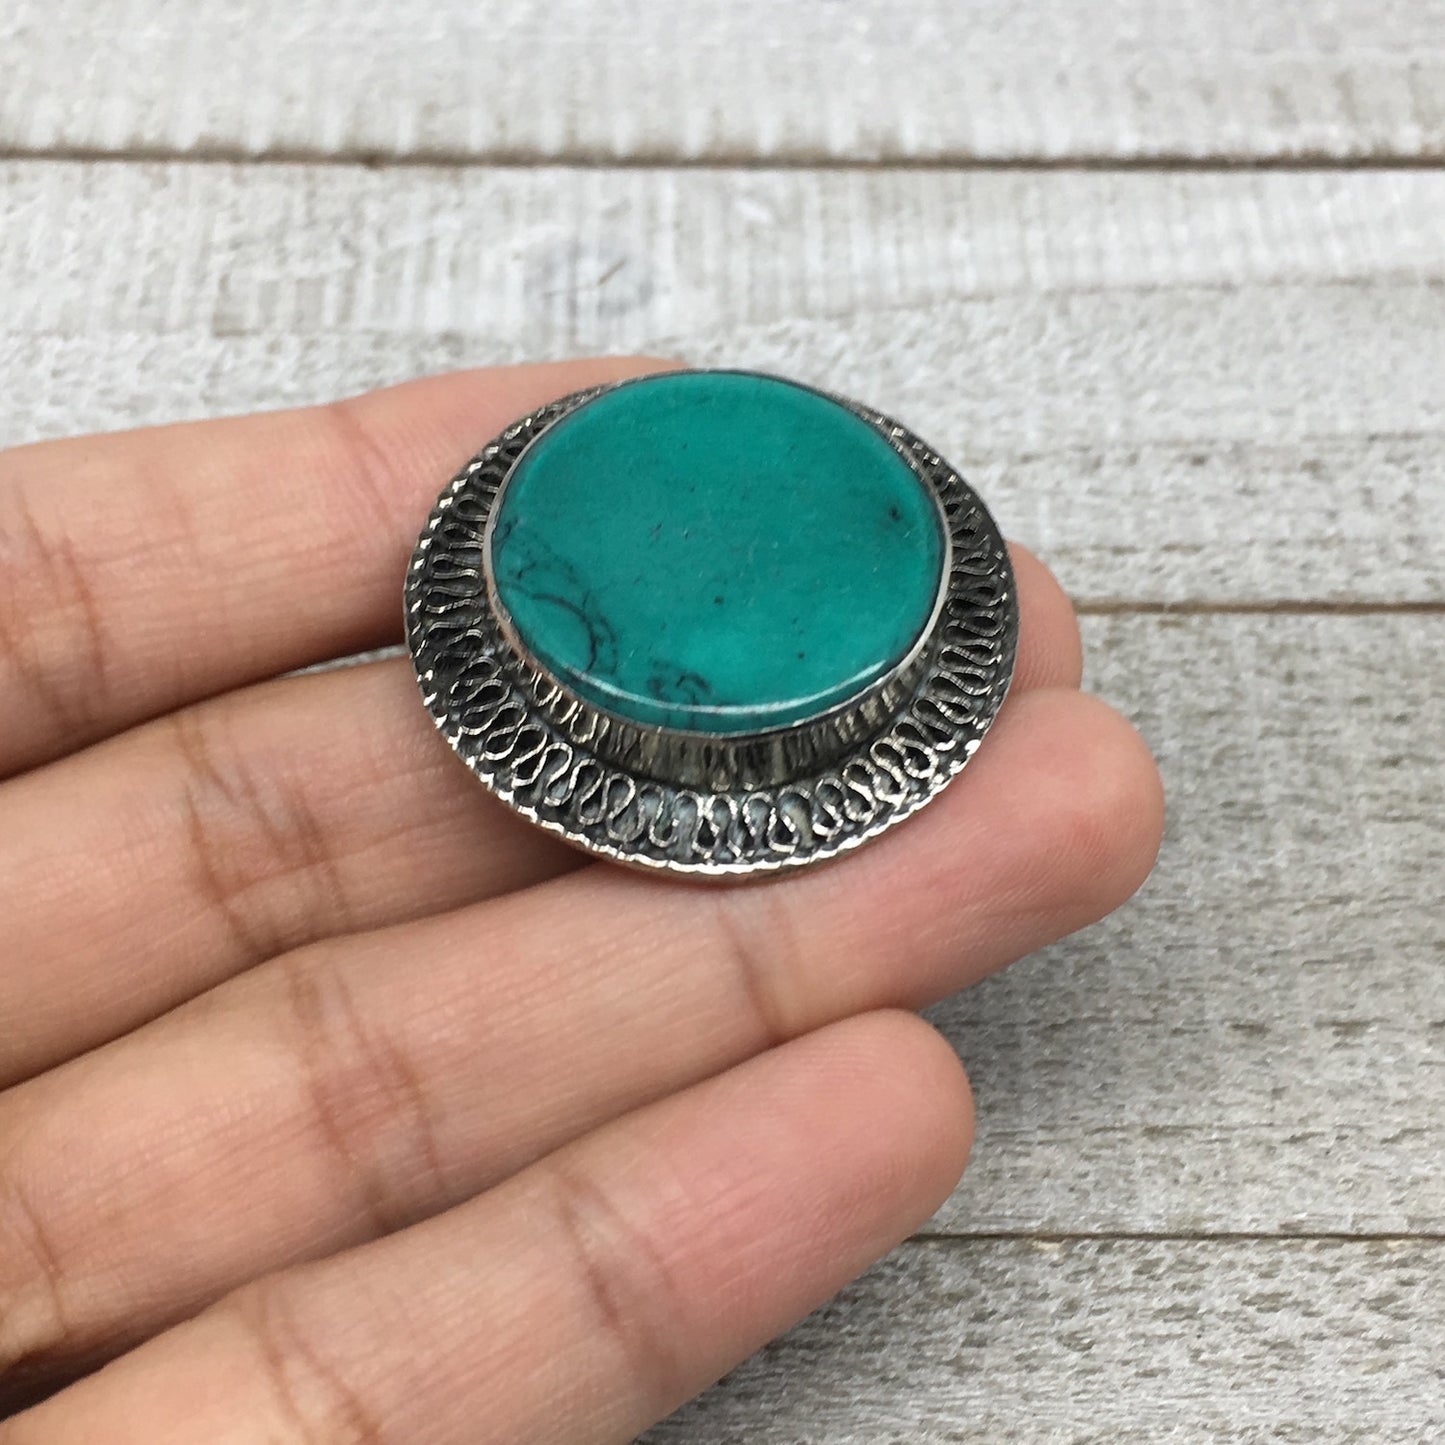 1.4"Turkmen Ring Afghan Tribal Round Synthetic Green Turquoise,7.5,8,8.5,9,TR120